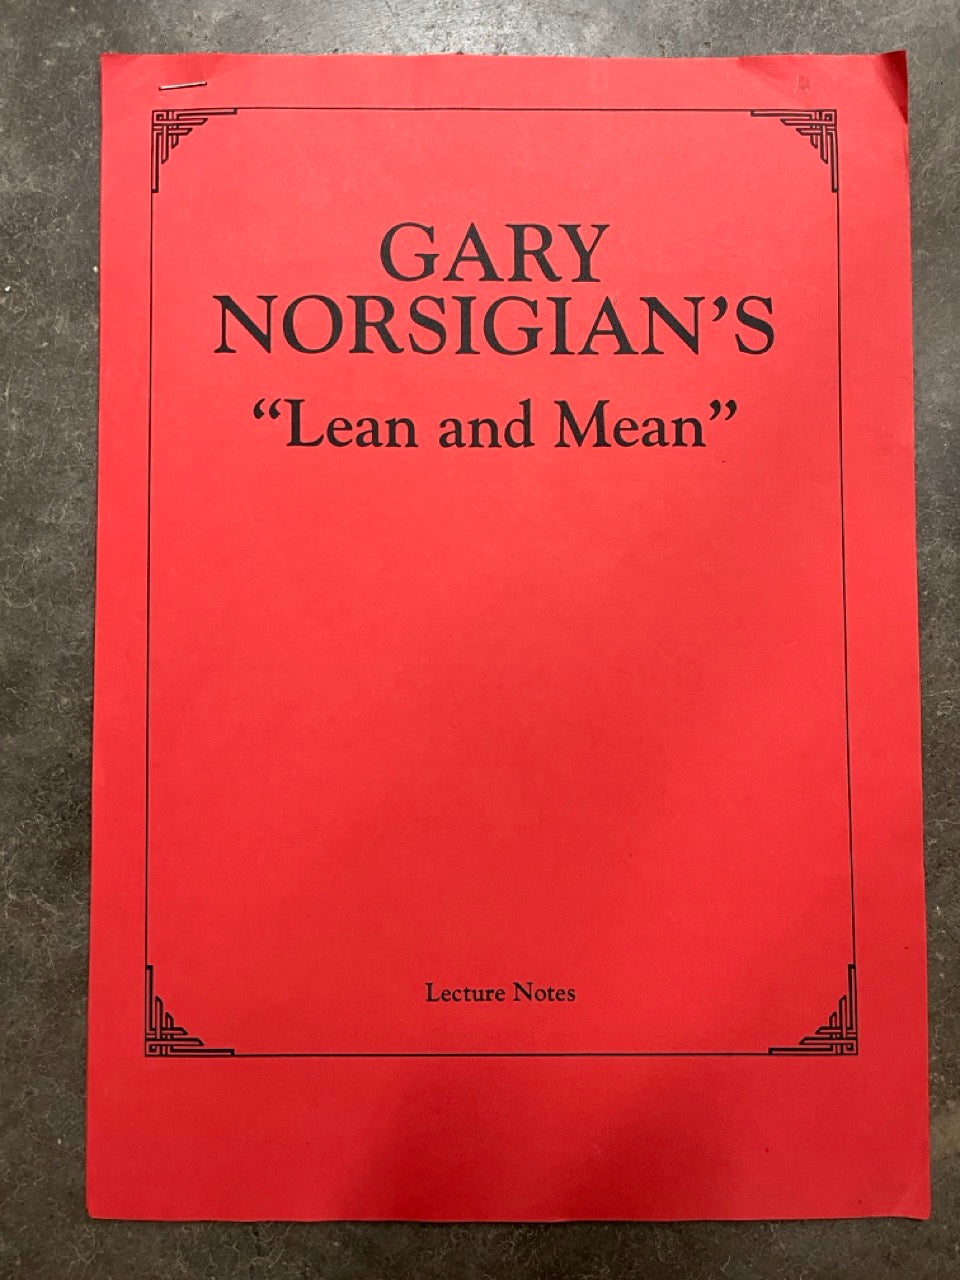 Gary Norsigian's "Lean and Mean" Lecture Notes